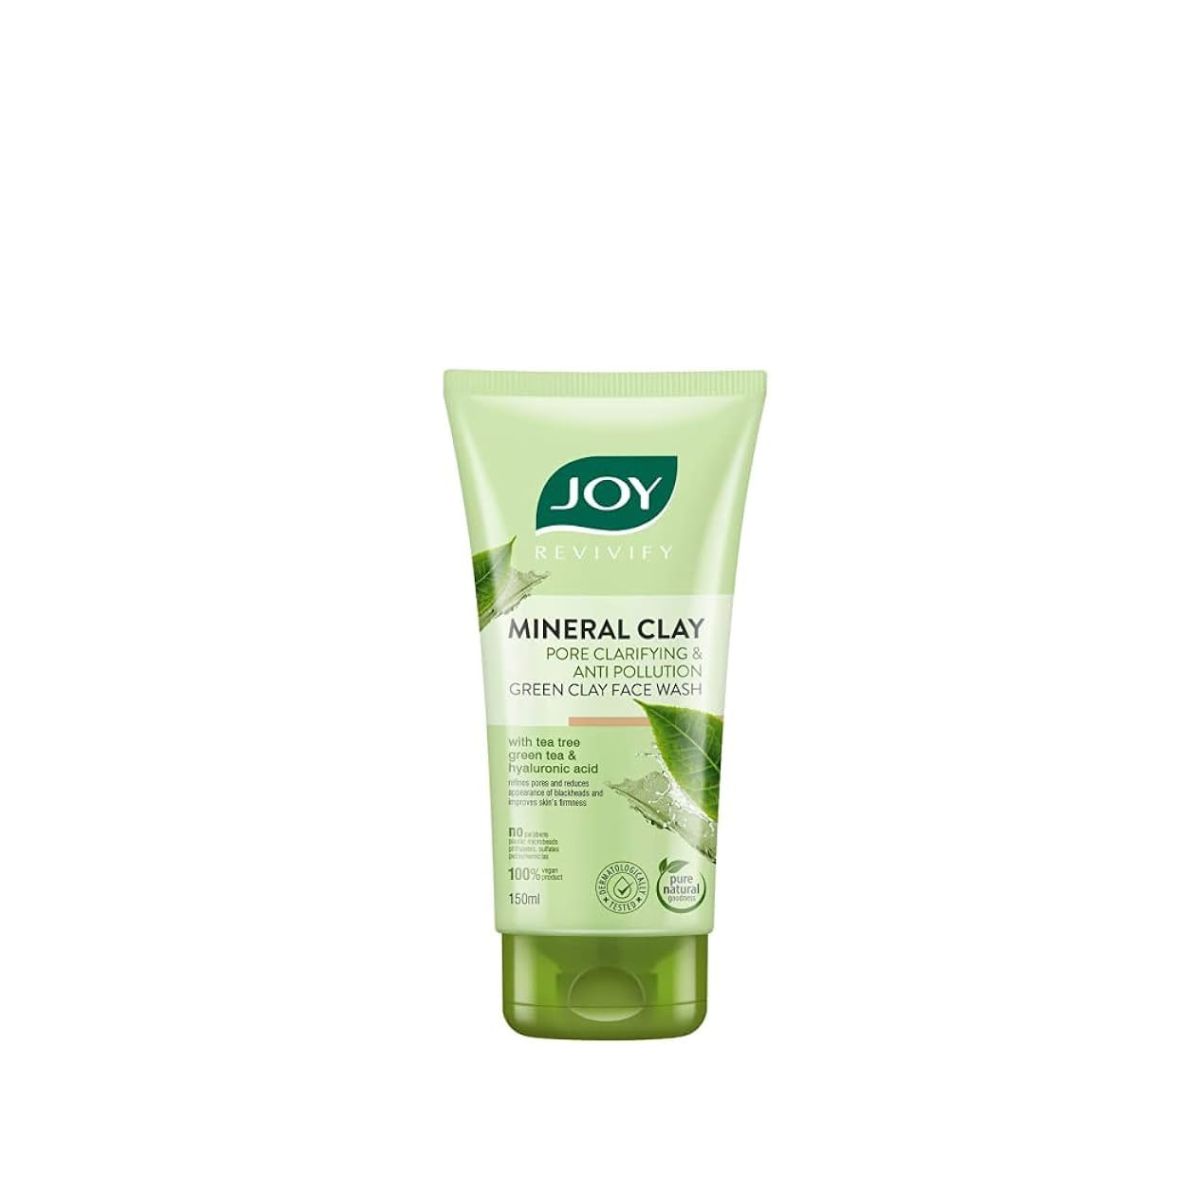 Joy Revivify - Mineral Clay - Pore Clarifying & Anti Pollution - Green Clay Face Wash - Pure Natural Goodness - 150ml